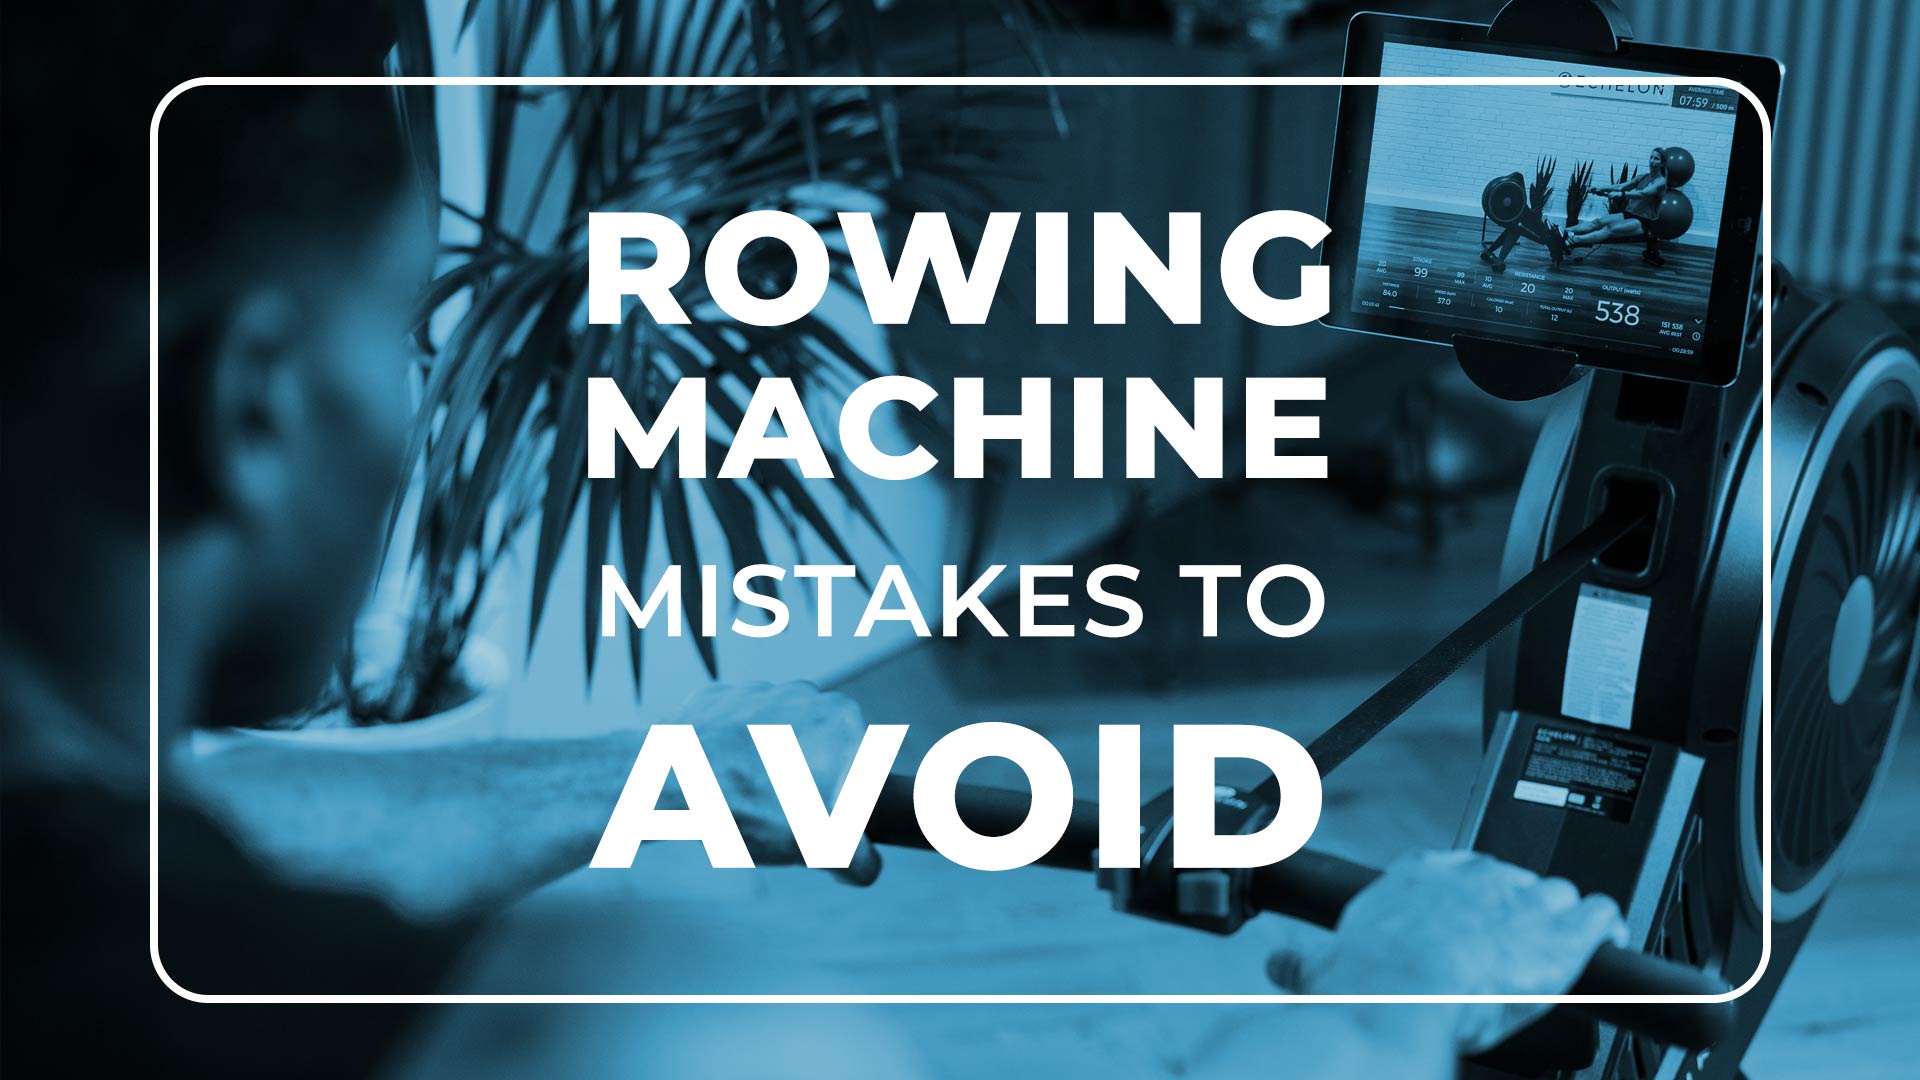 Rowing Machine Mistakes to Avoid